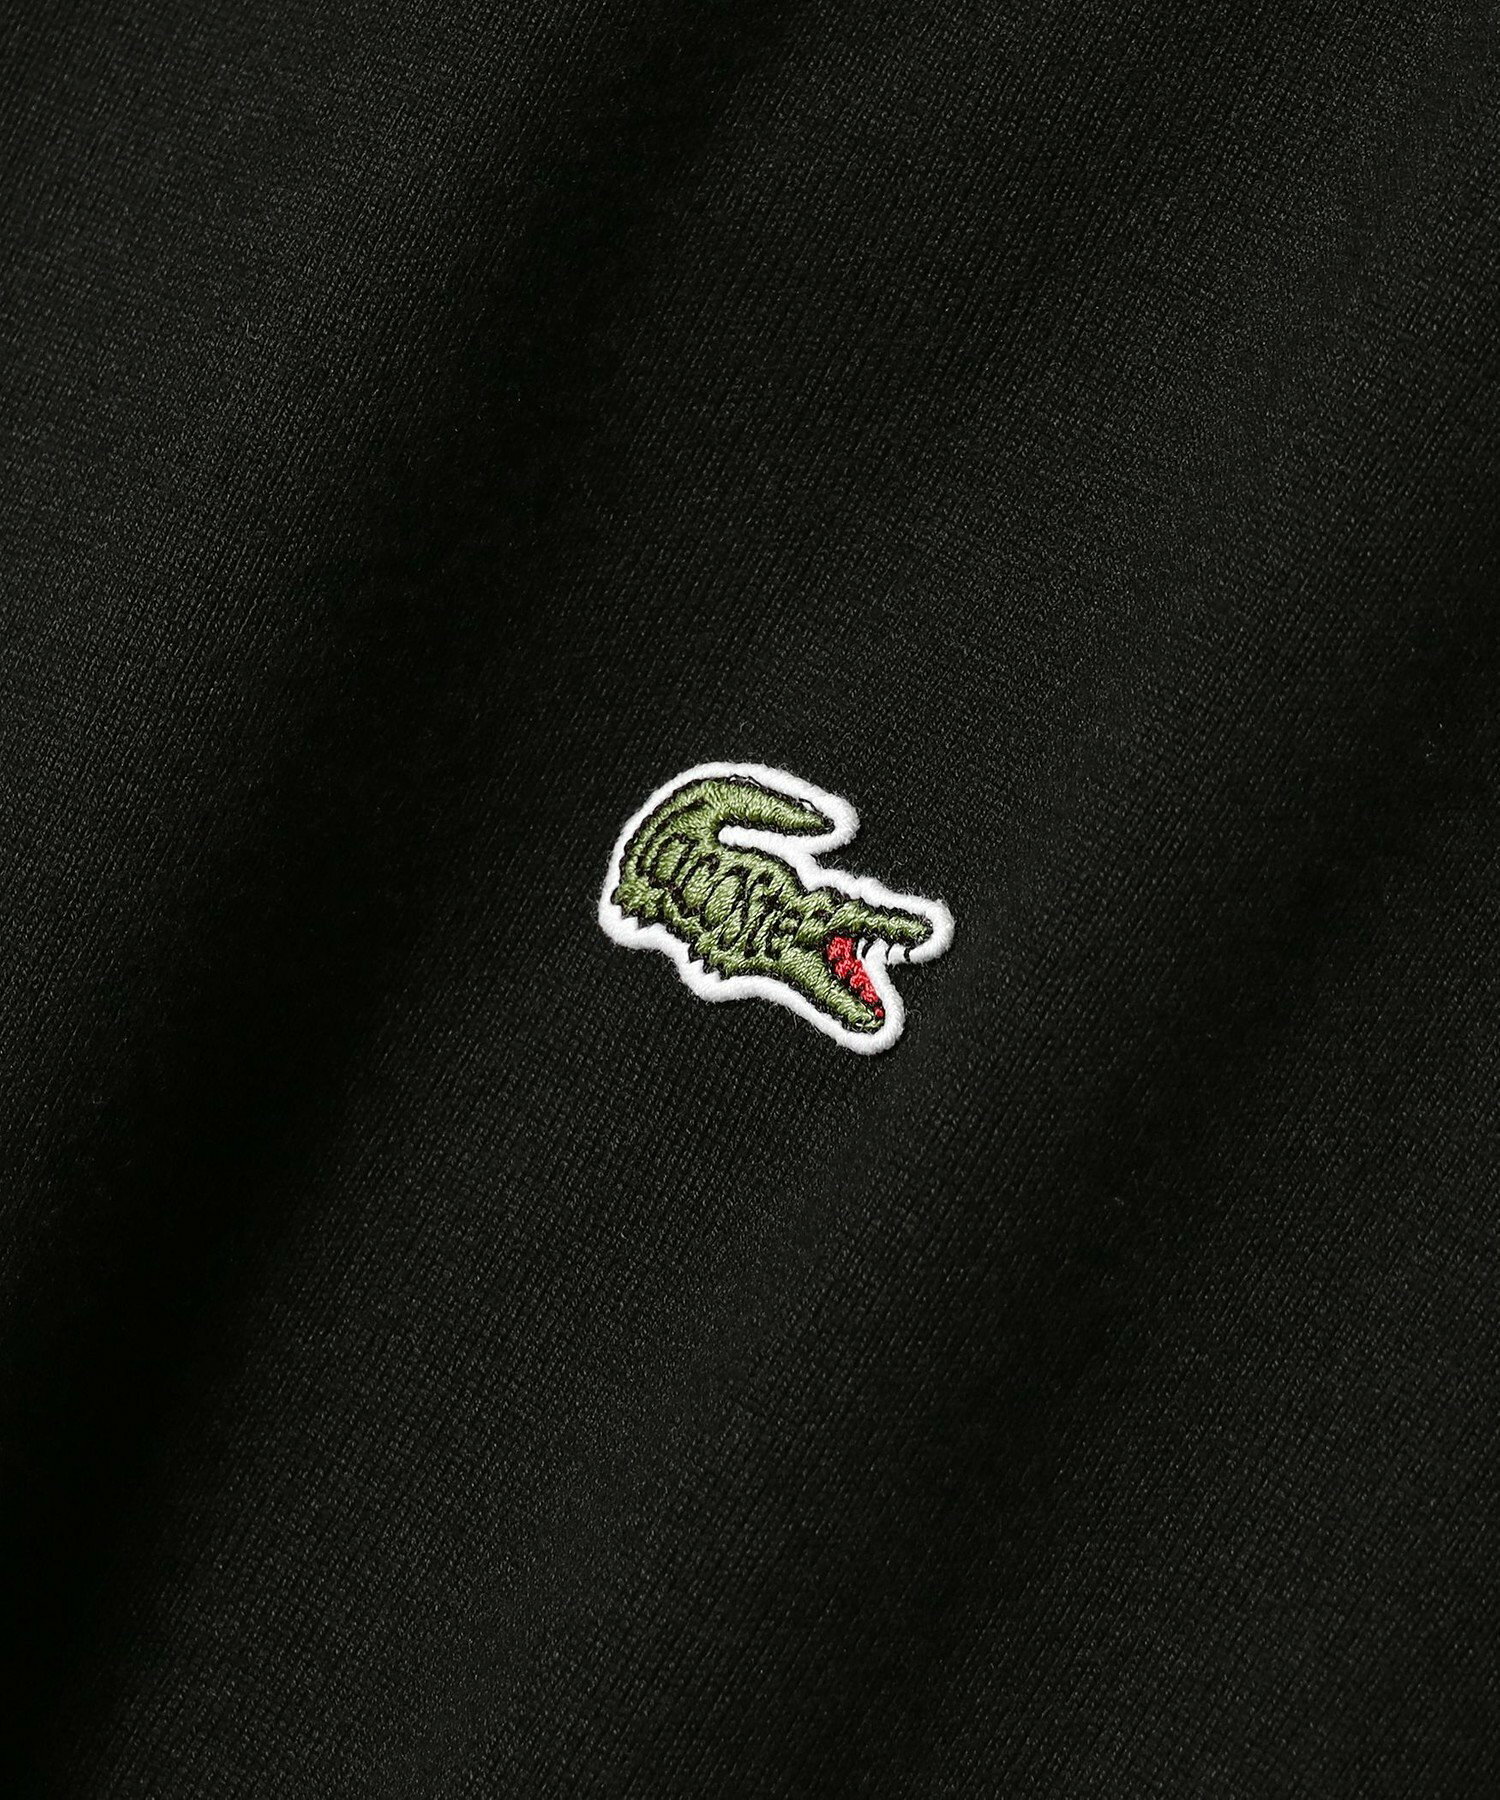 LACOSTE for BEAMS / 別注 ロゴ  Tシャツ